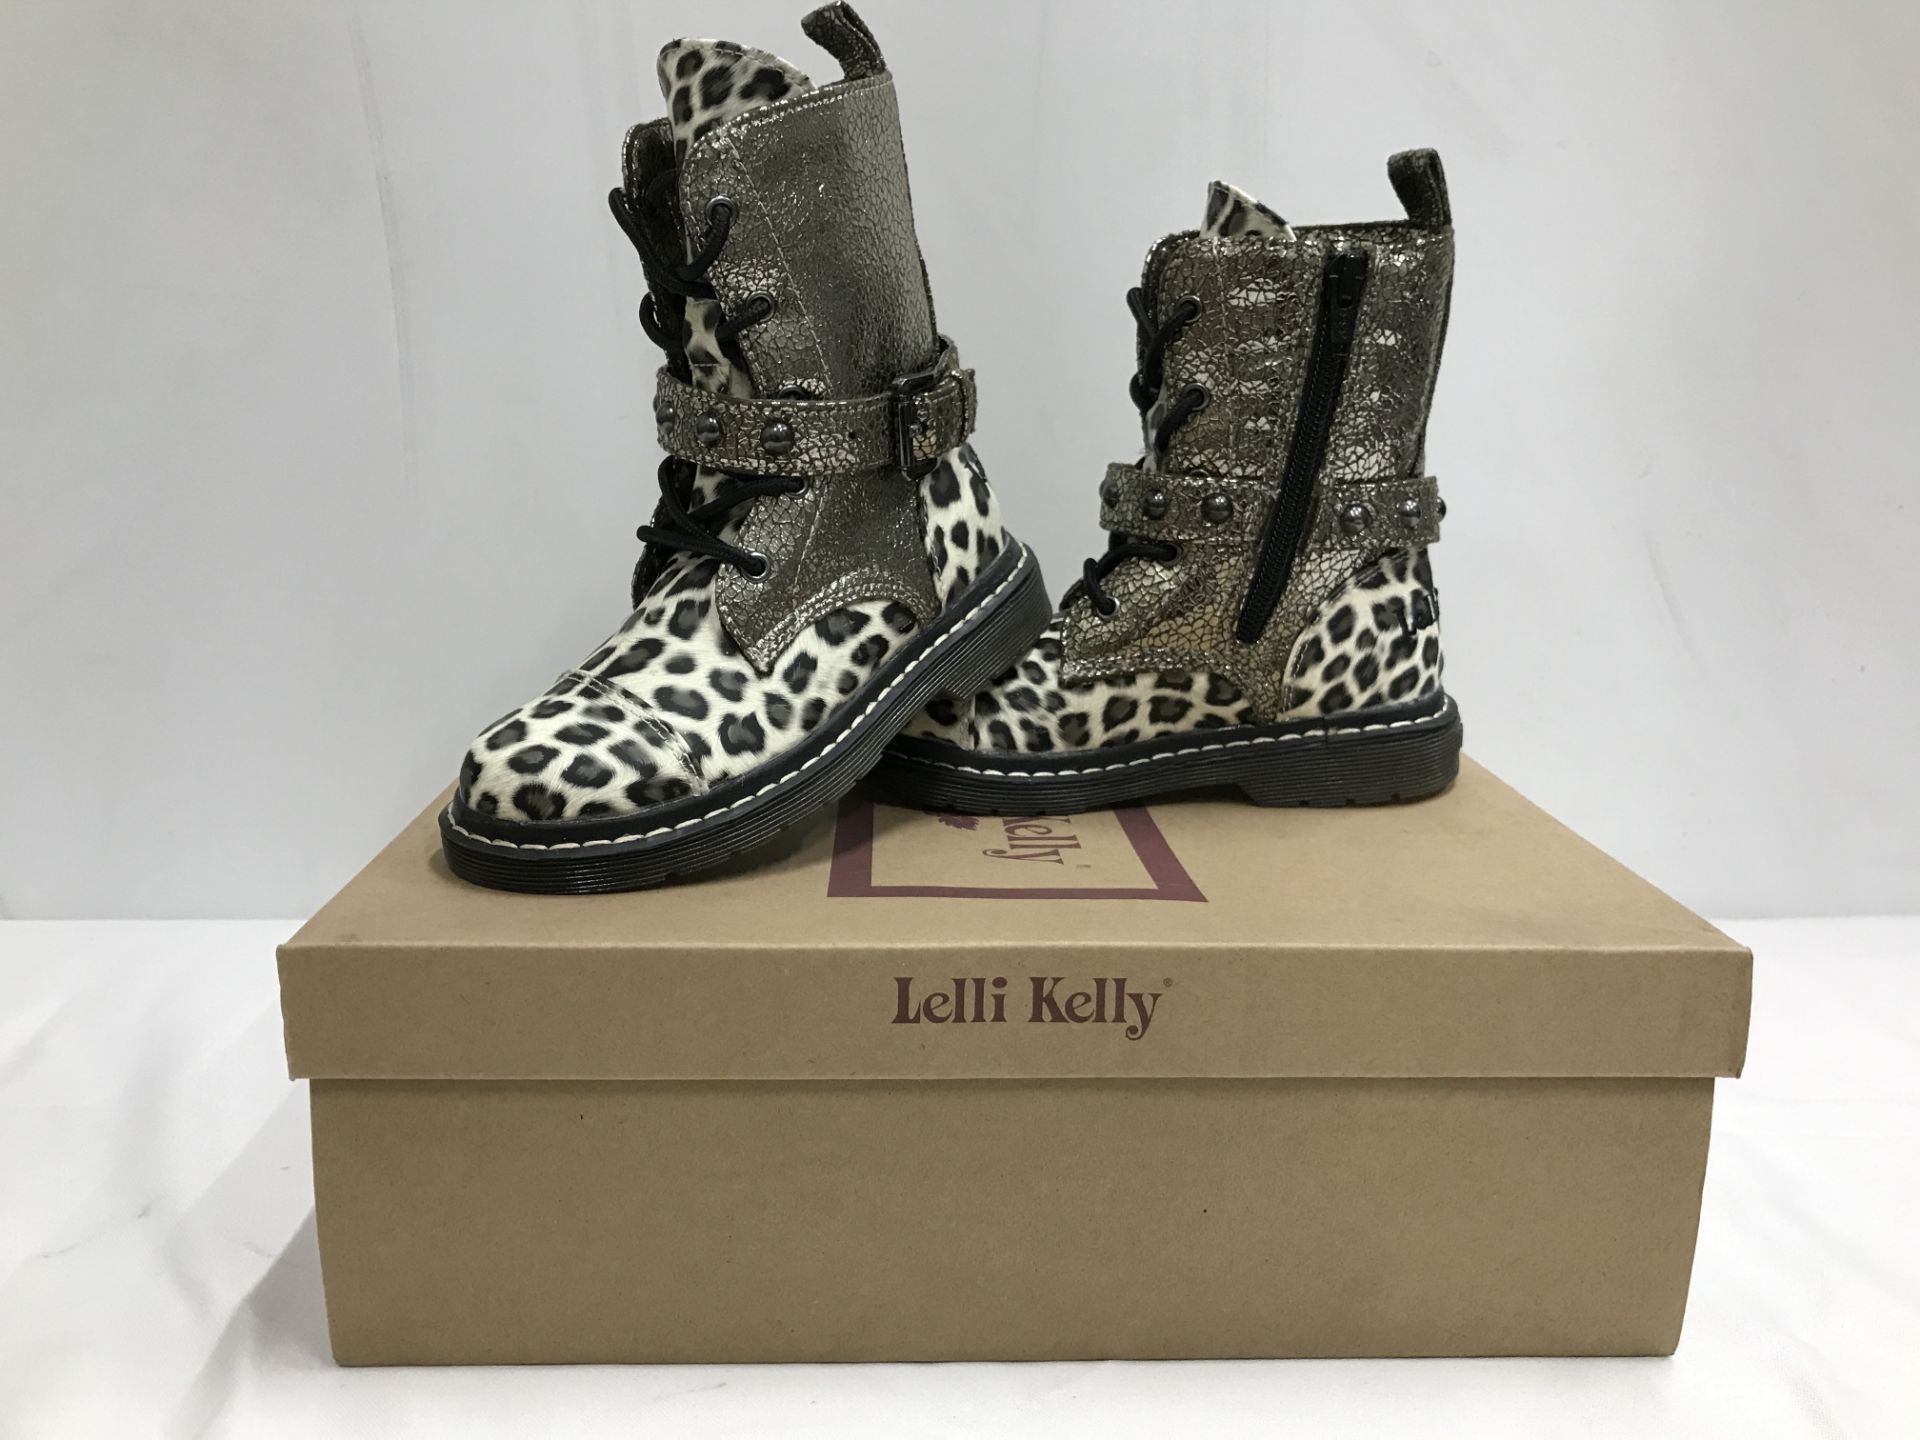 11 x Pairs of Lelli Kelly Children's Shoes - Various Designs - Size UK9 - Image 7 of 7